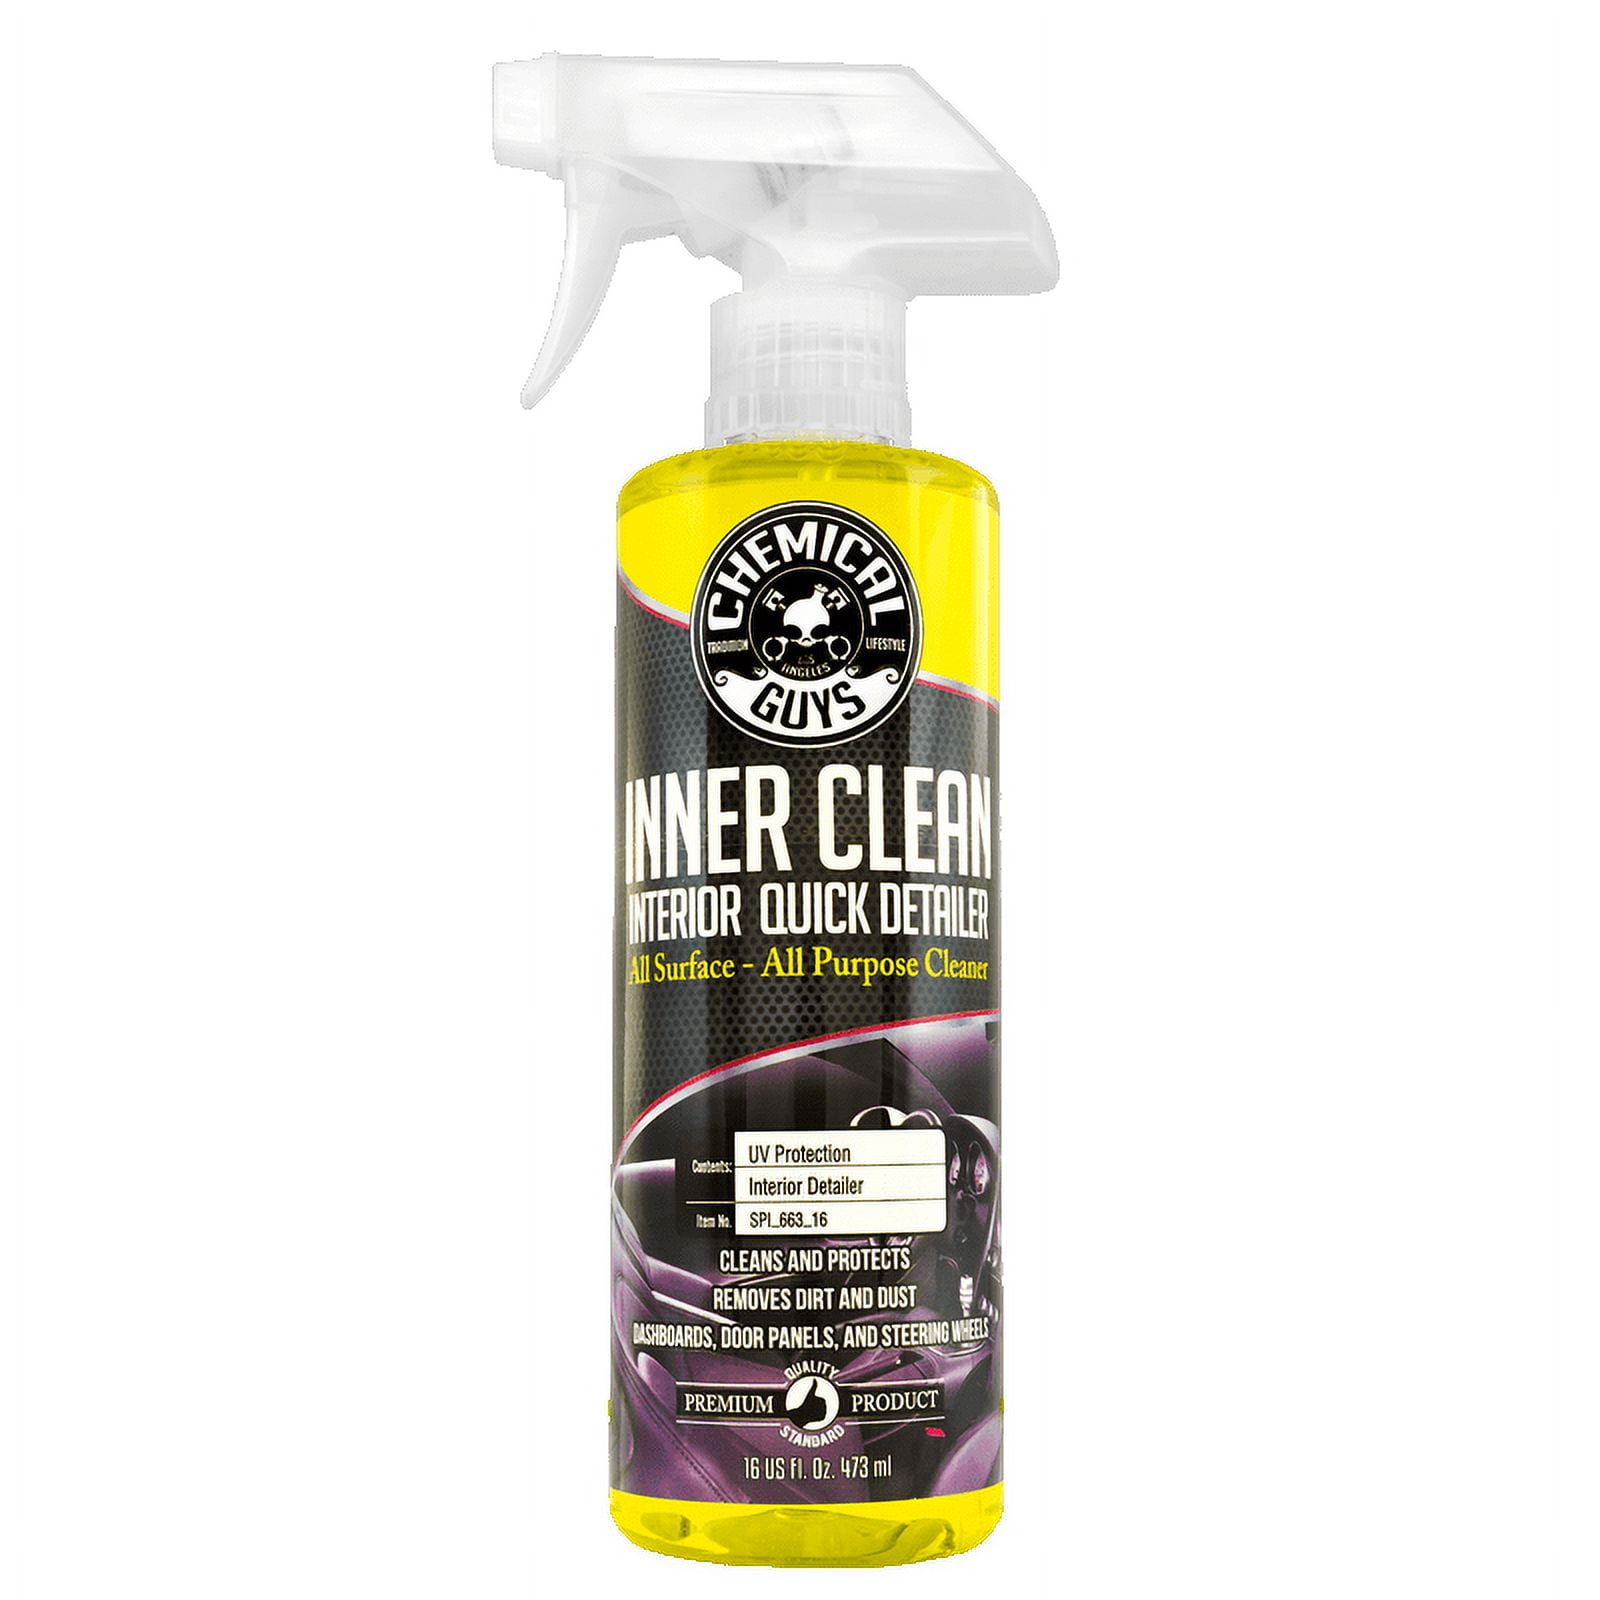  Superior Products California Cover All Automotive Tire Shine  Aerosol Spray Can & Professional Grade -Tire Dressing - High Gloss - Water  Repellent & Made in America (14 oz) : Automotive